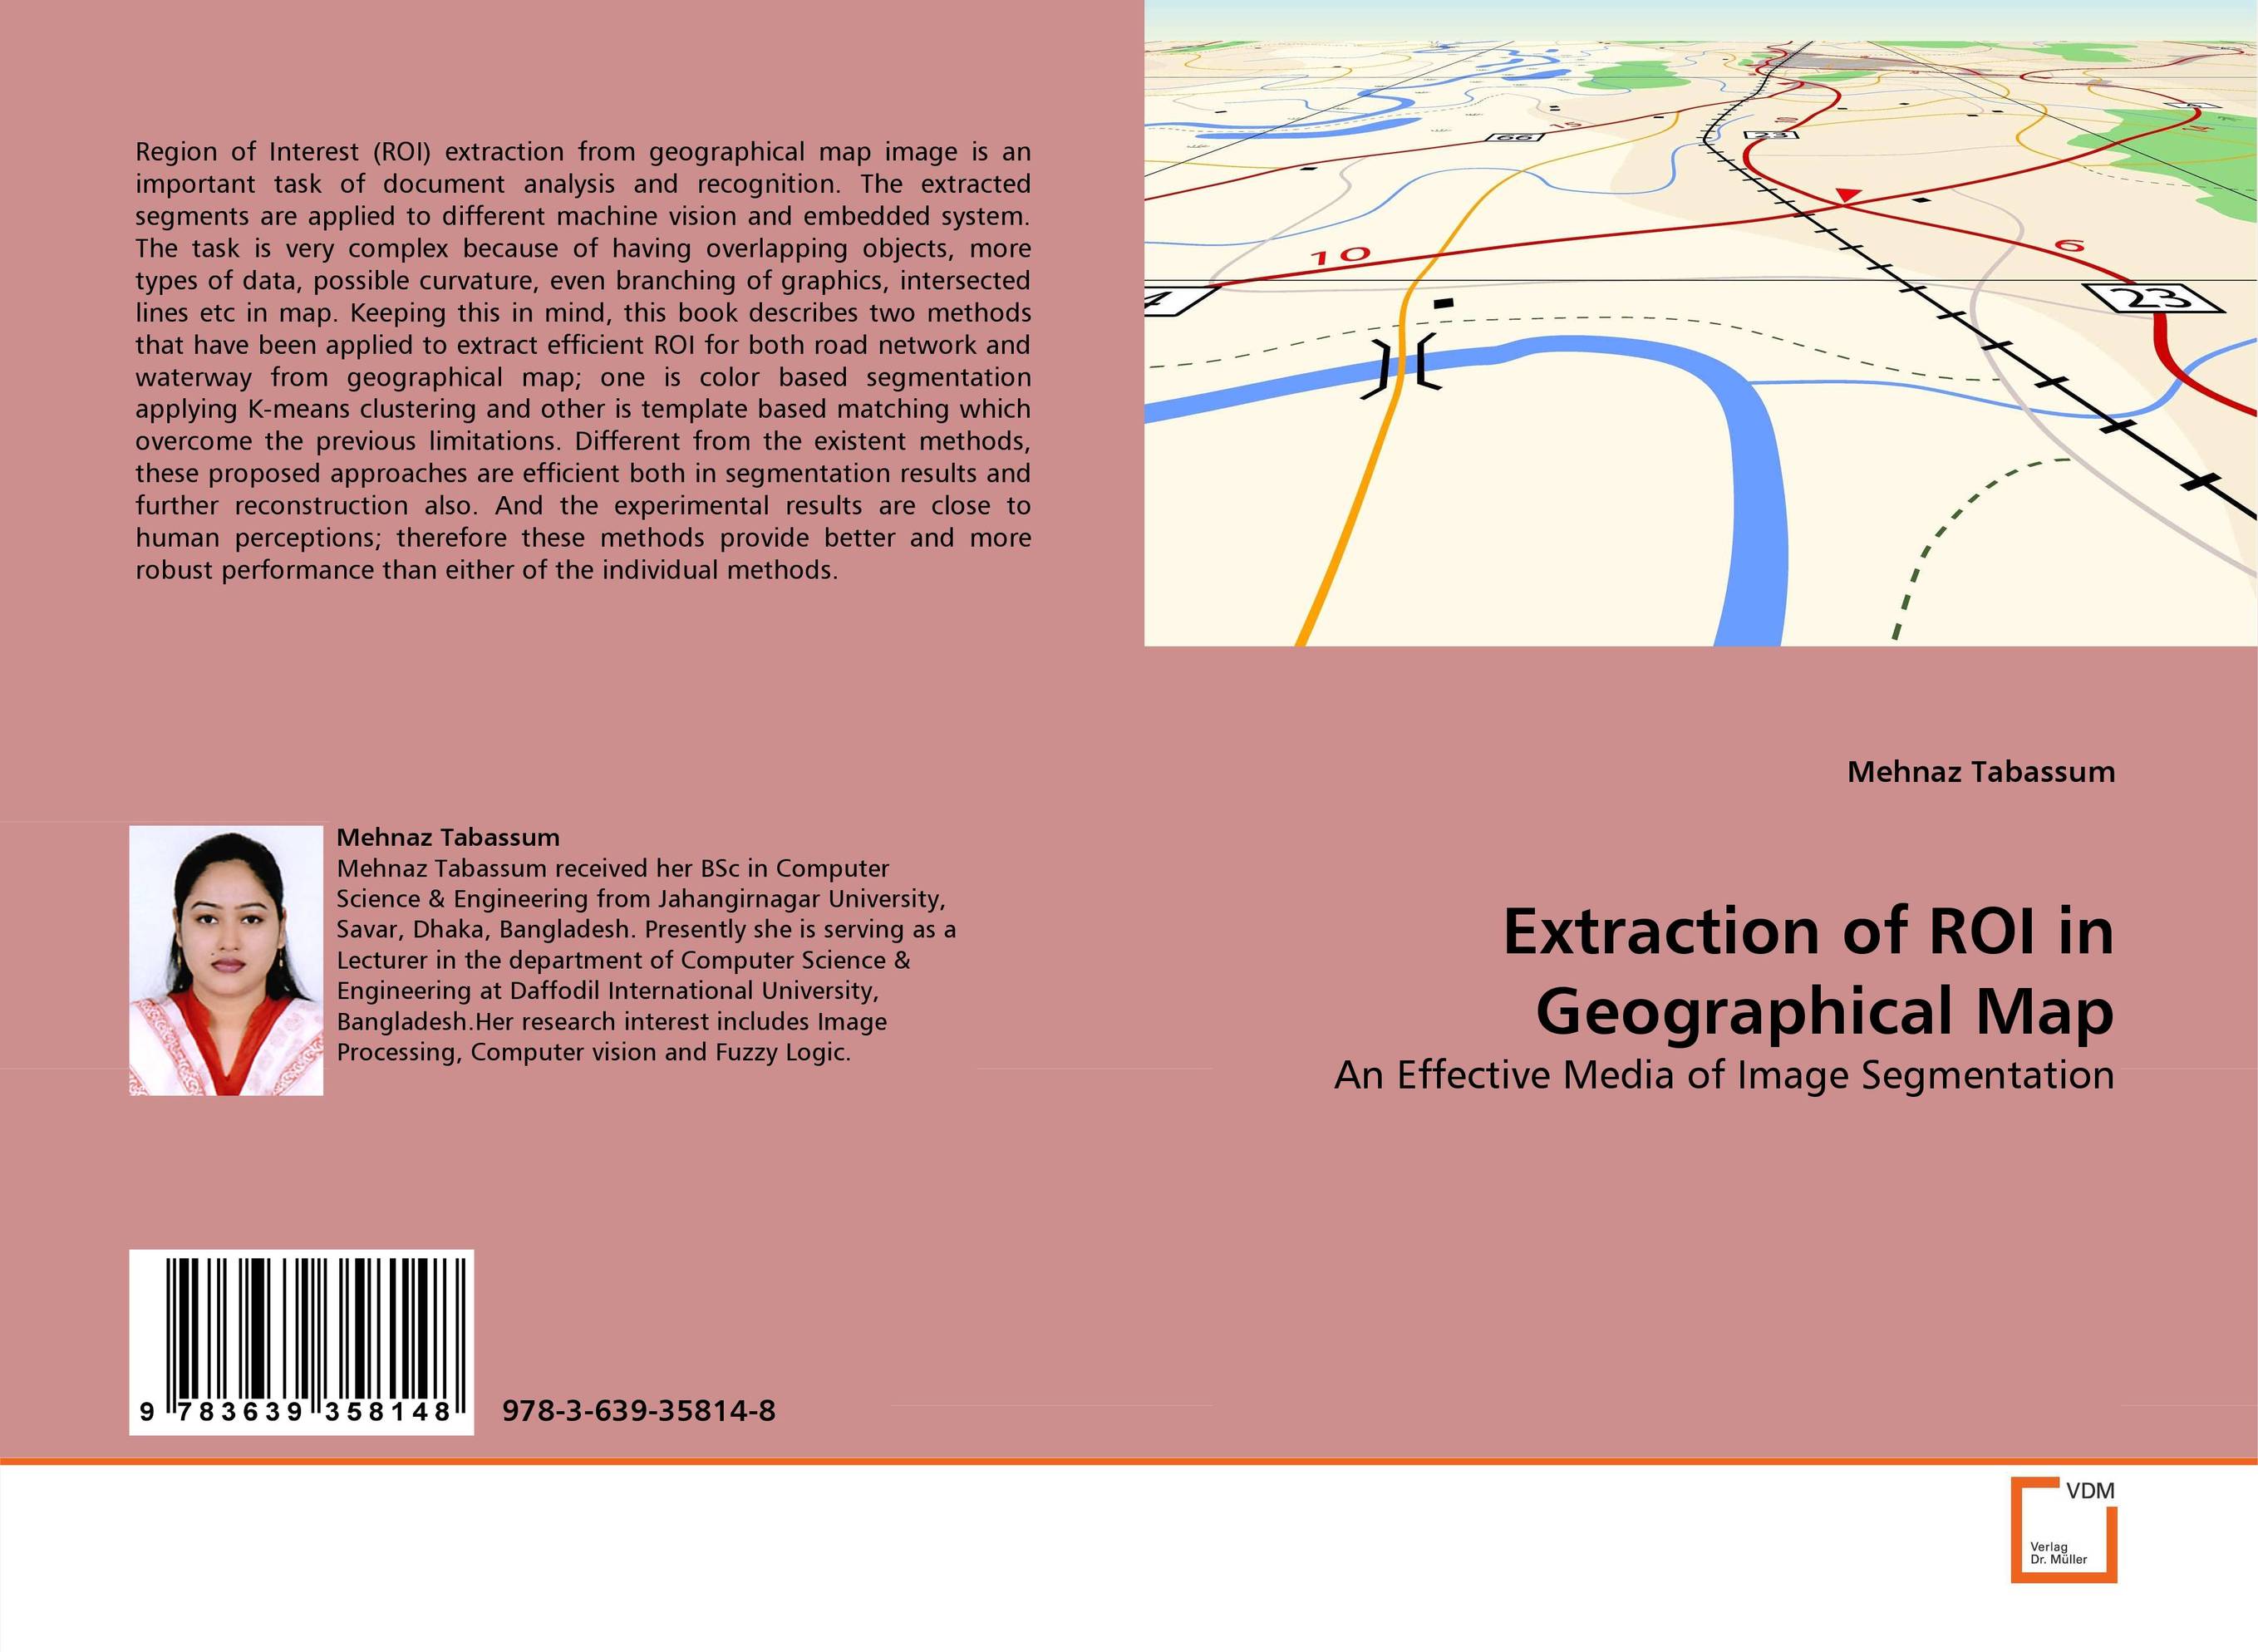 Extraction of ROI in Geographical Map